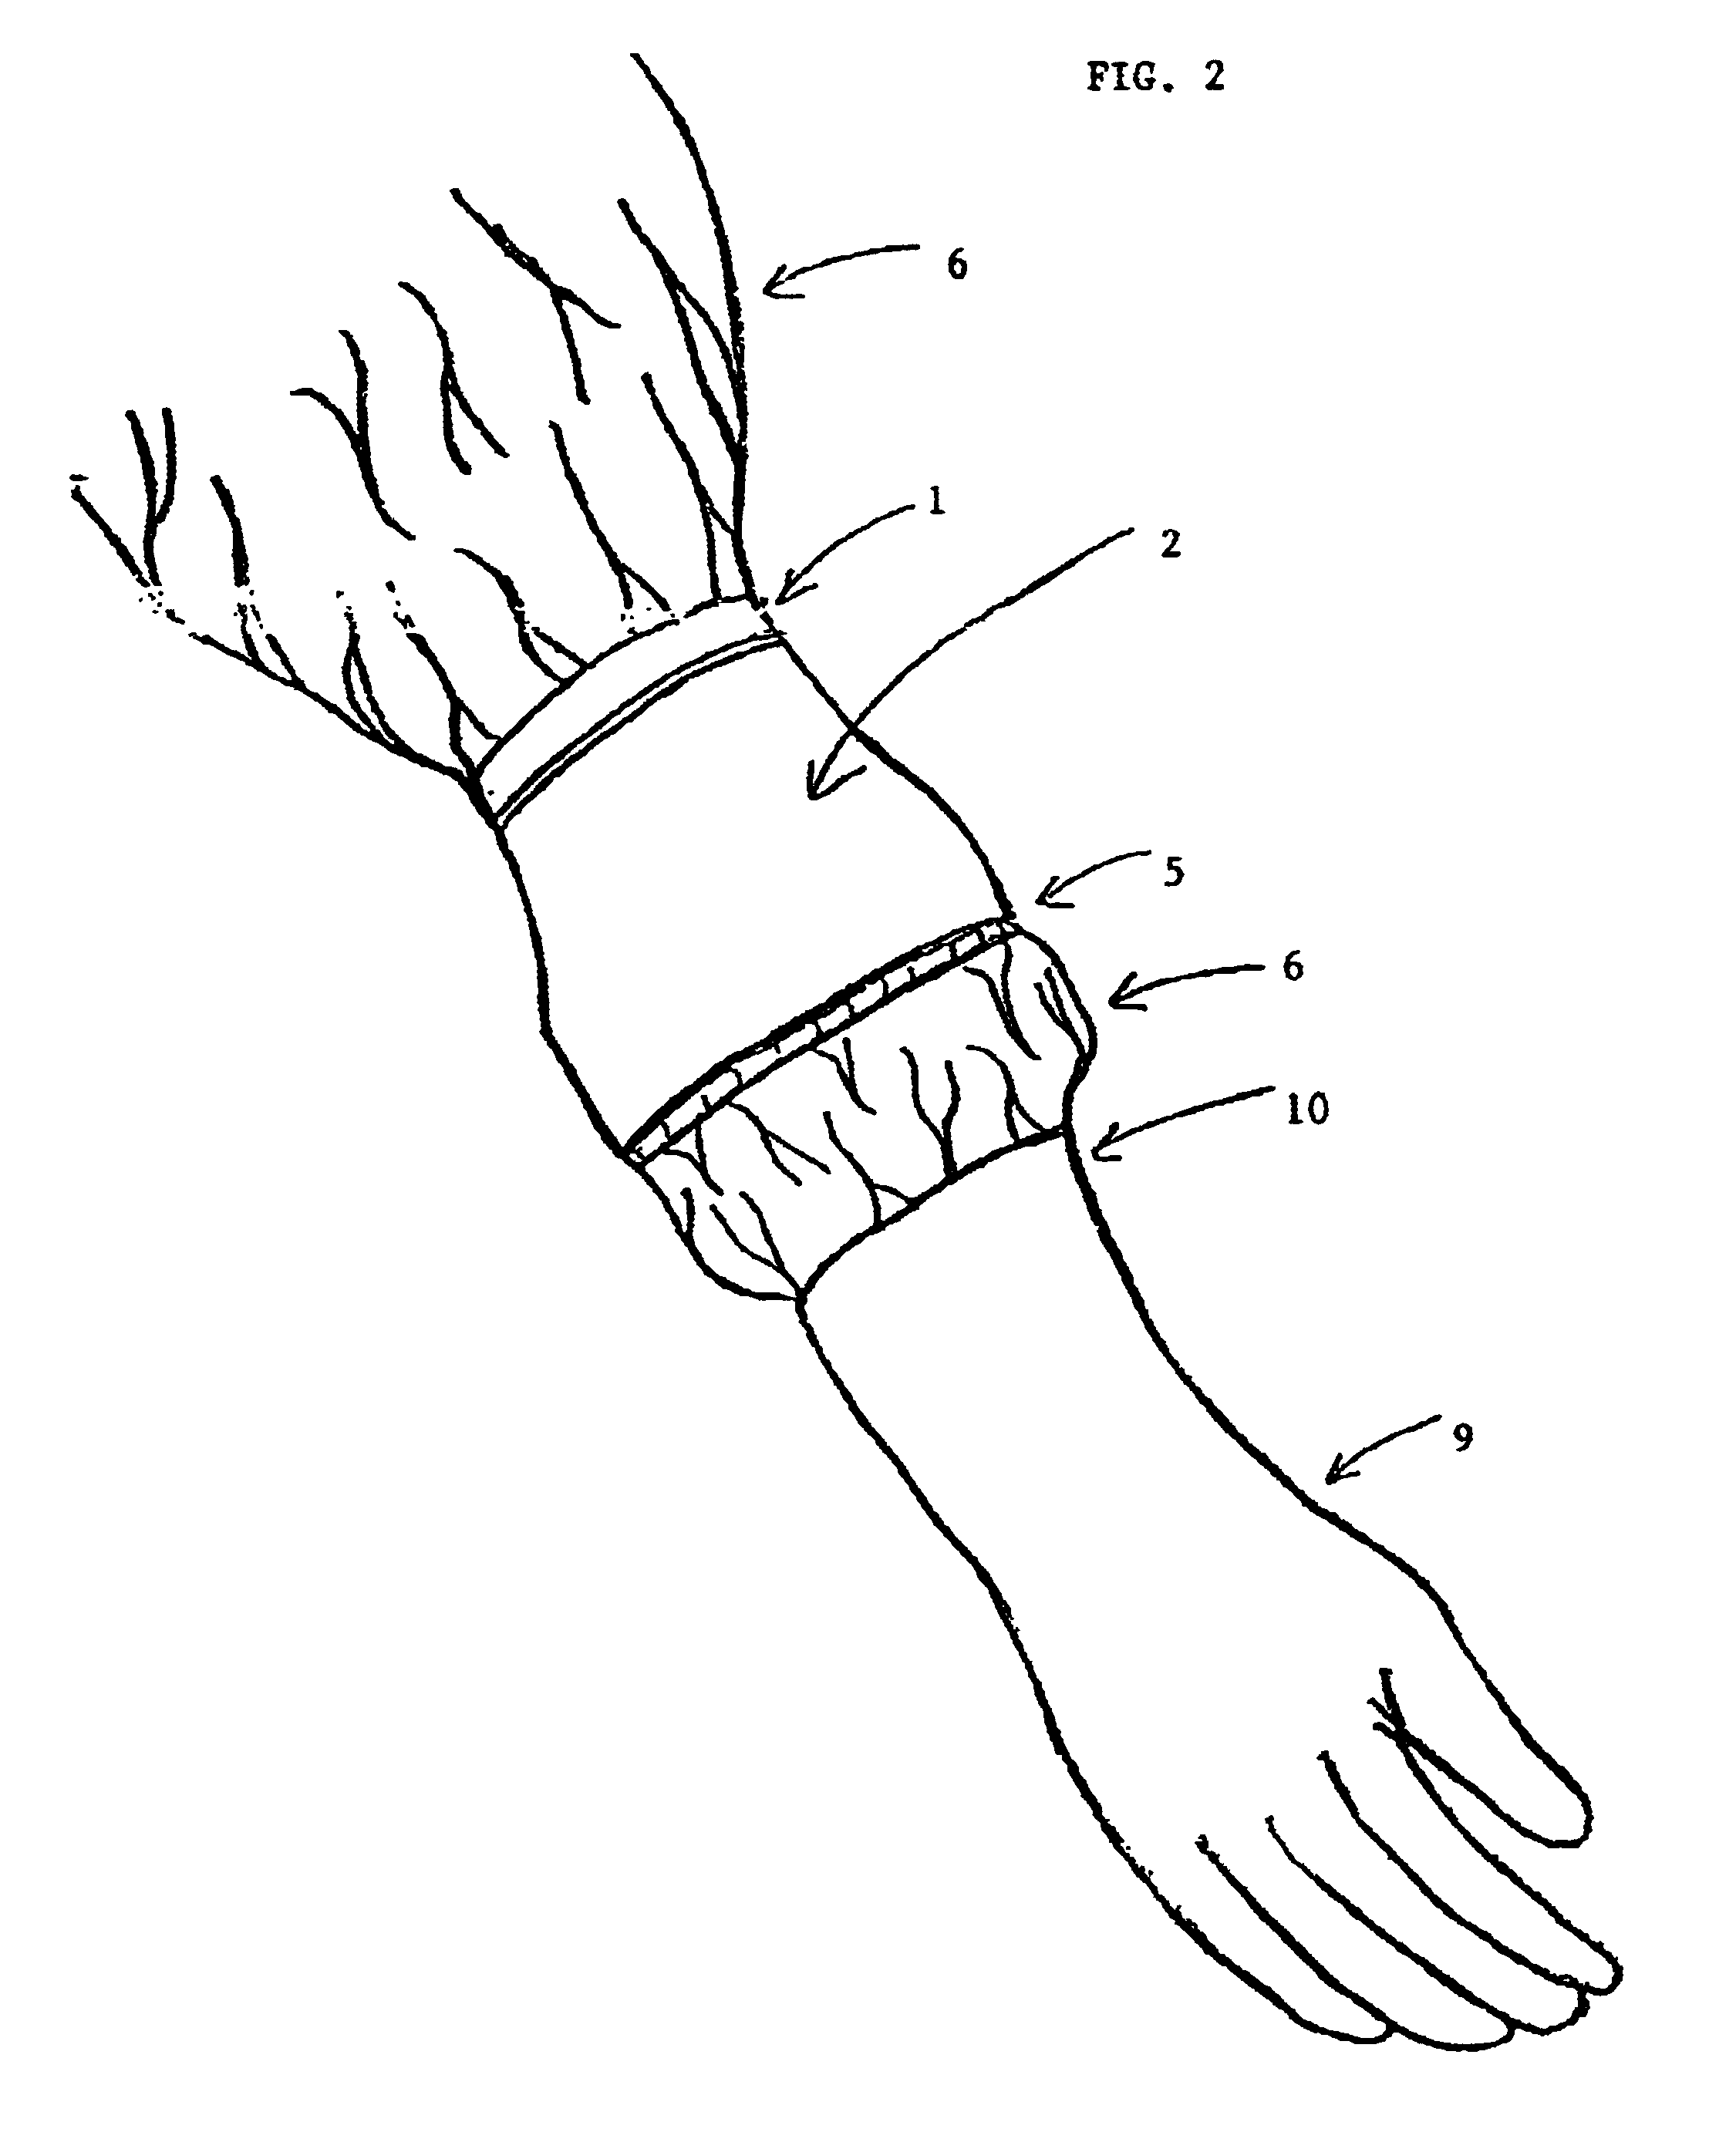 Elastic flap with sleeve and glove for liquid impervious seal